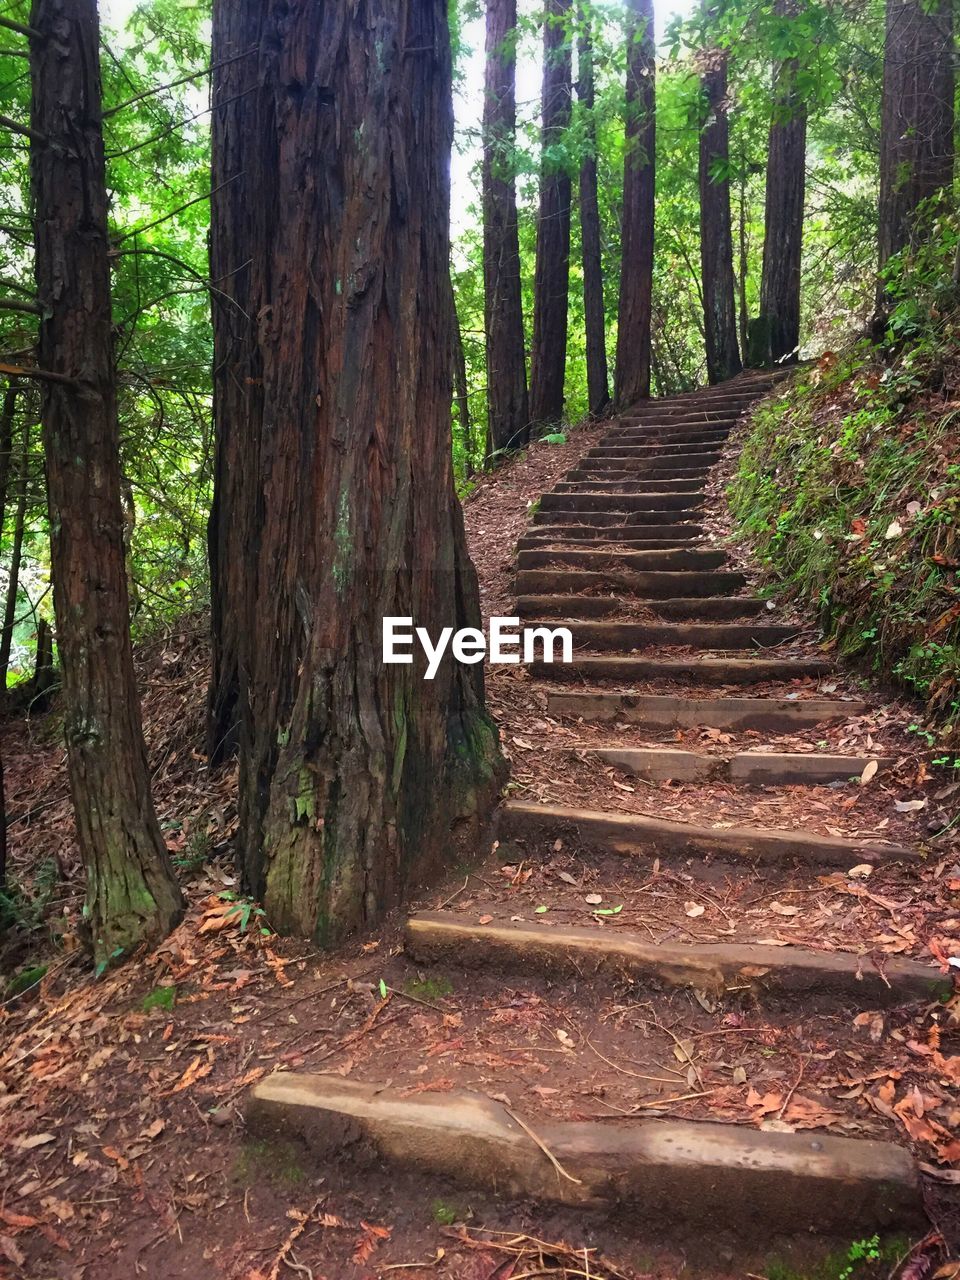 Trees growing by steps